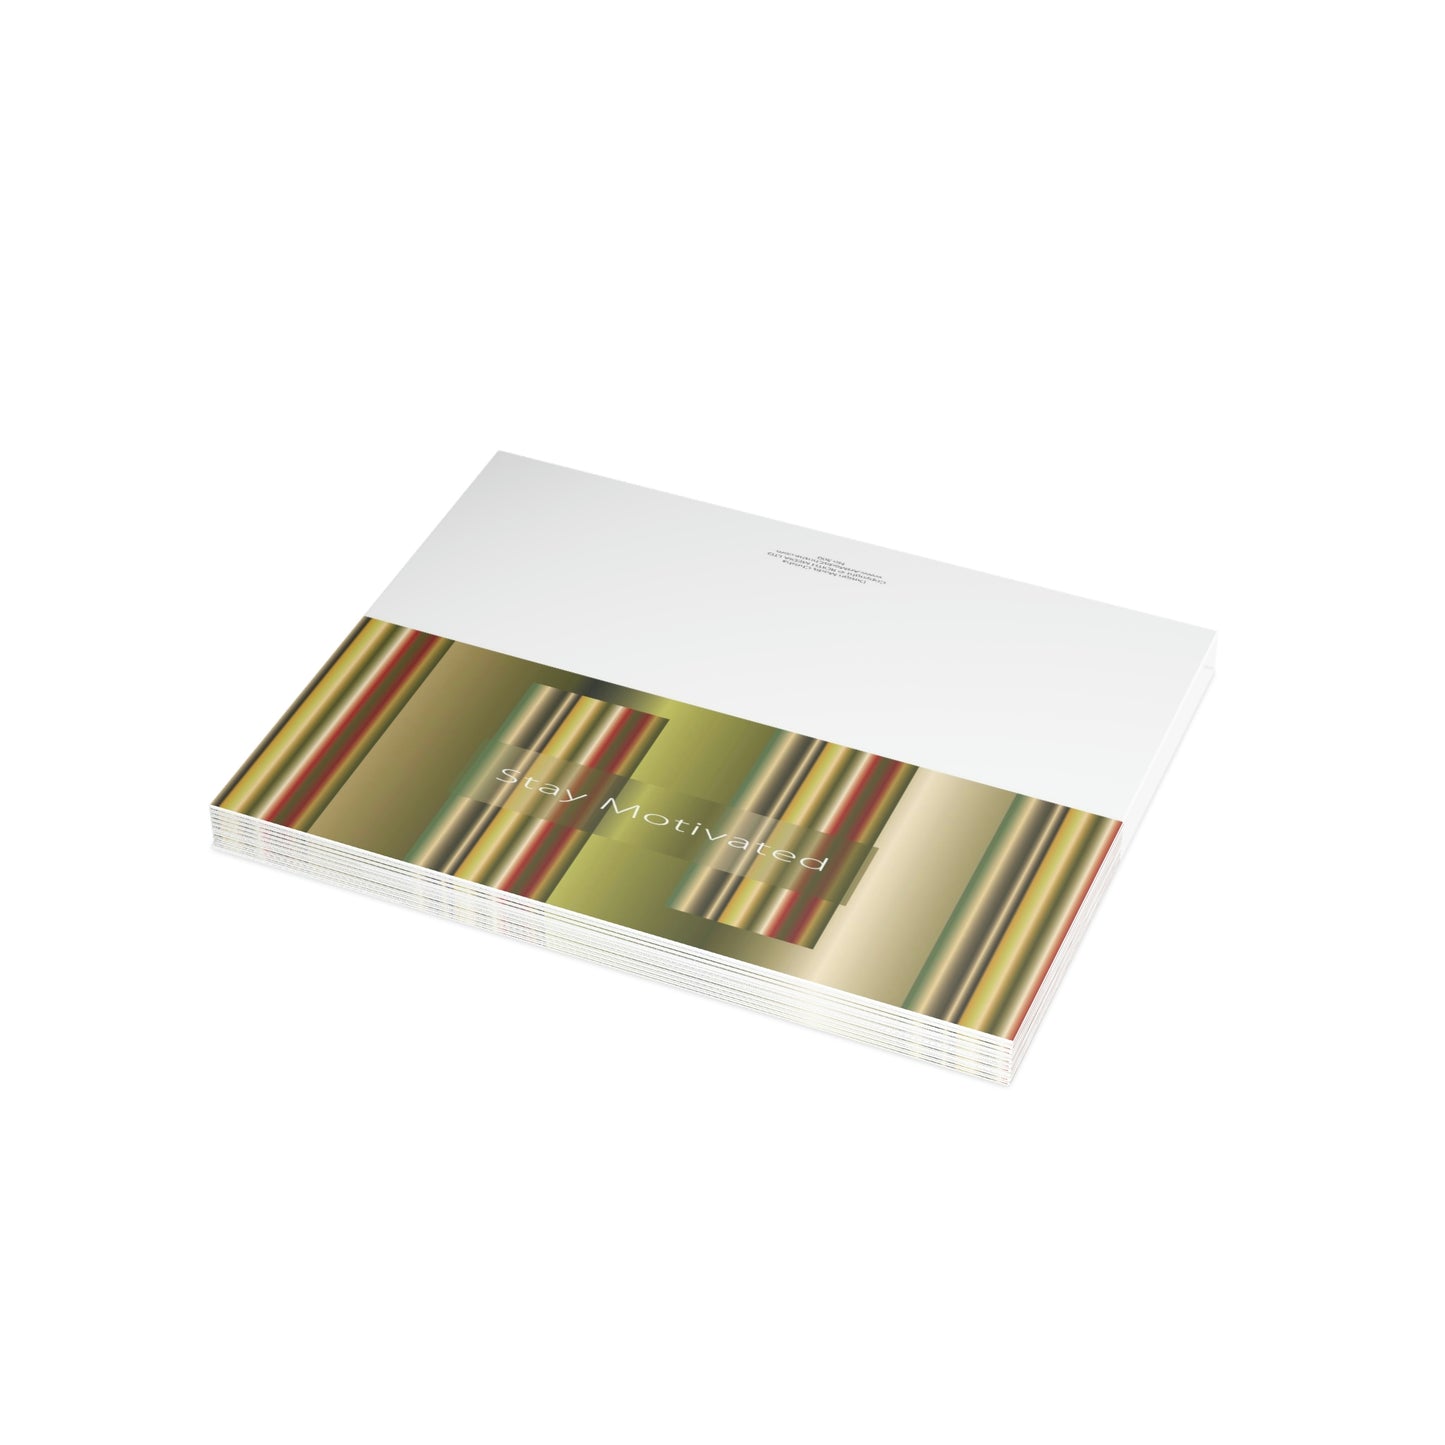 Folded Greeting Cards Horizontal (1, 10, 30, and 50pcs) Stay Motivated - Design No.300